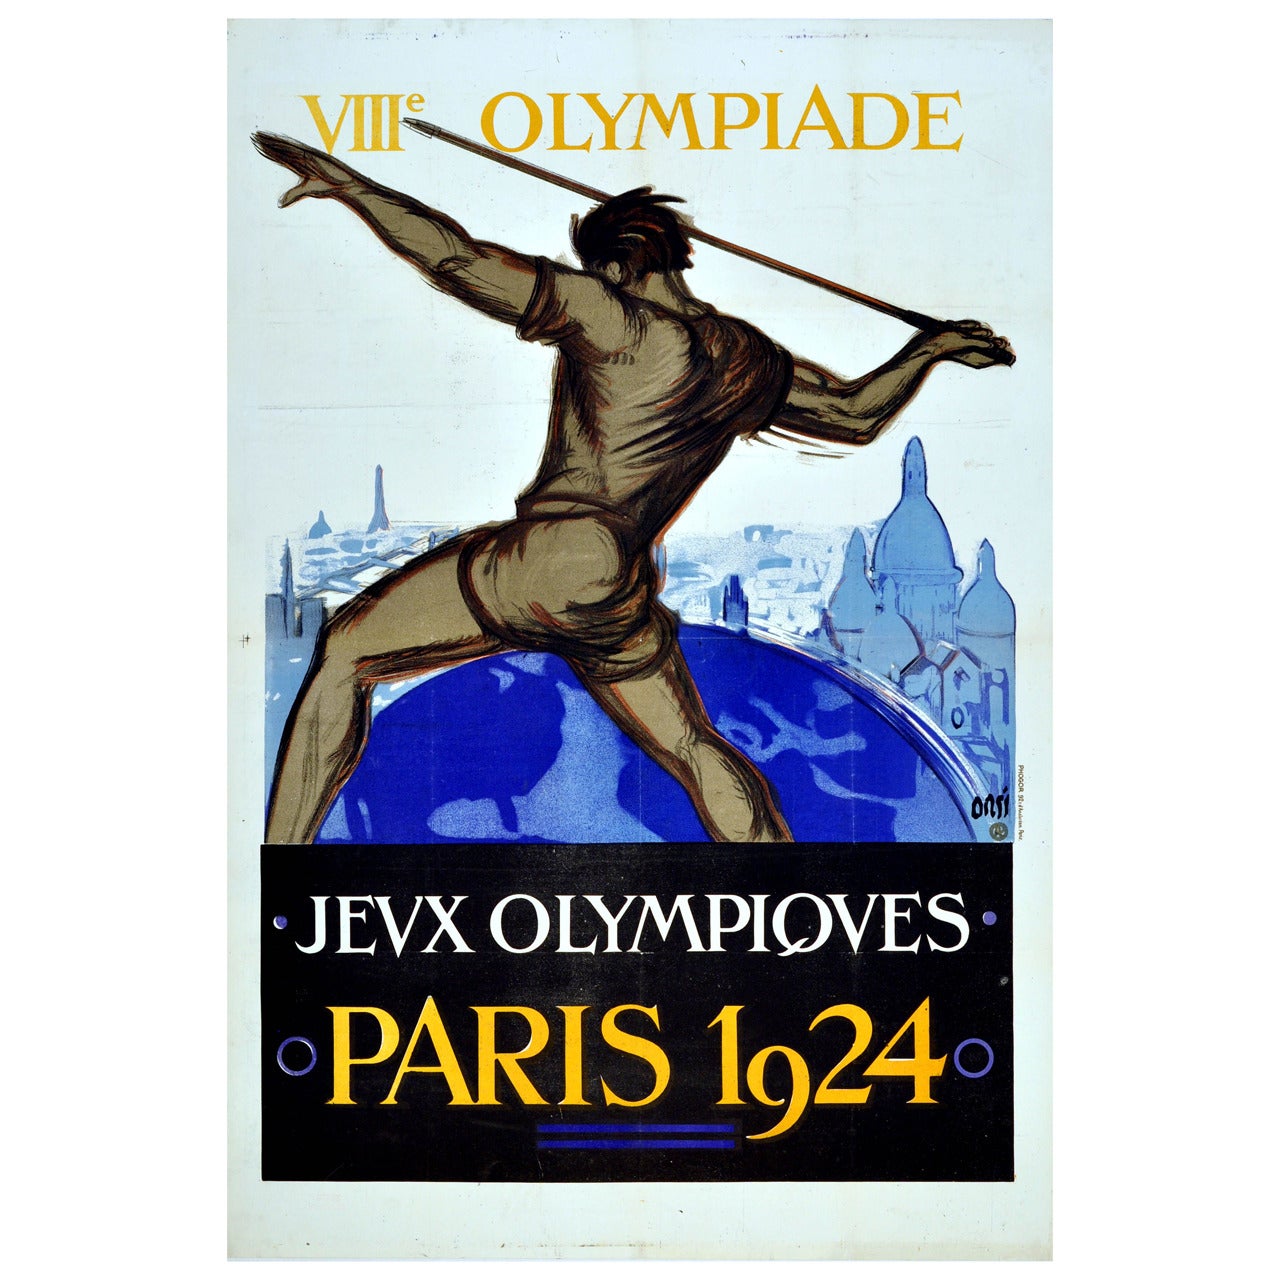 Original Vintage Summer Olympic Games Poster for the VIII Olympiad, Paris 1924